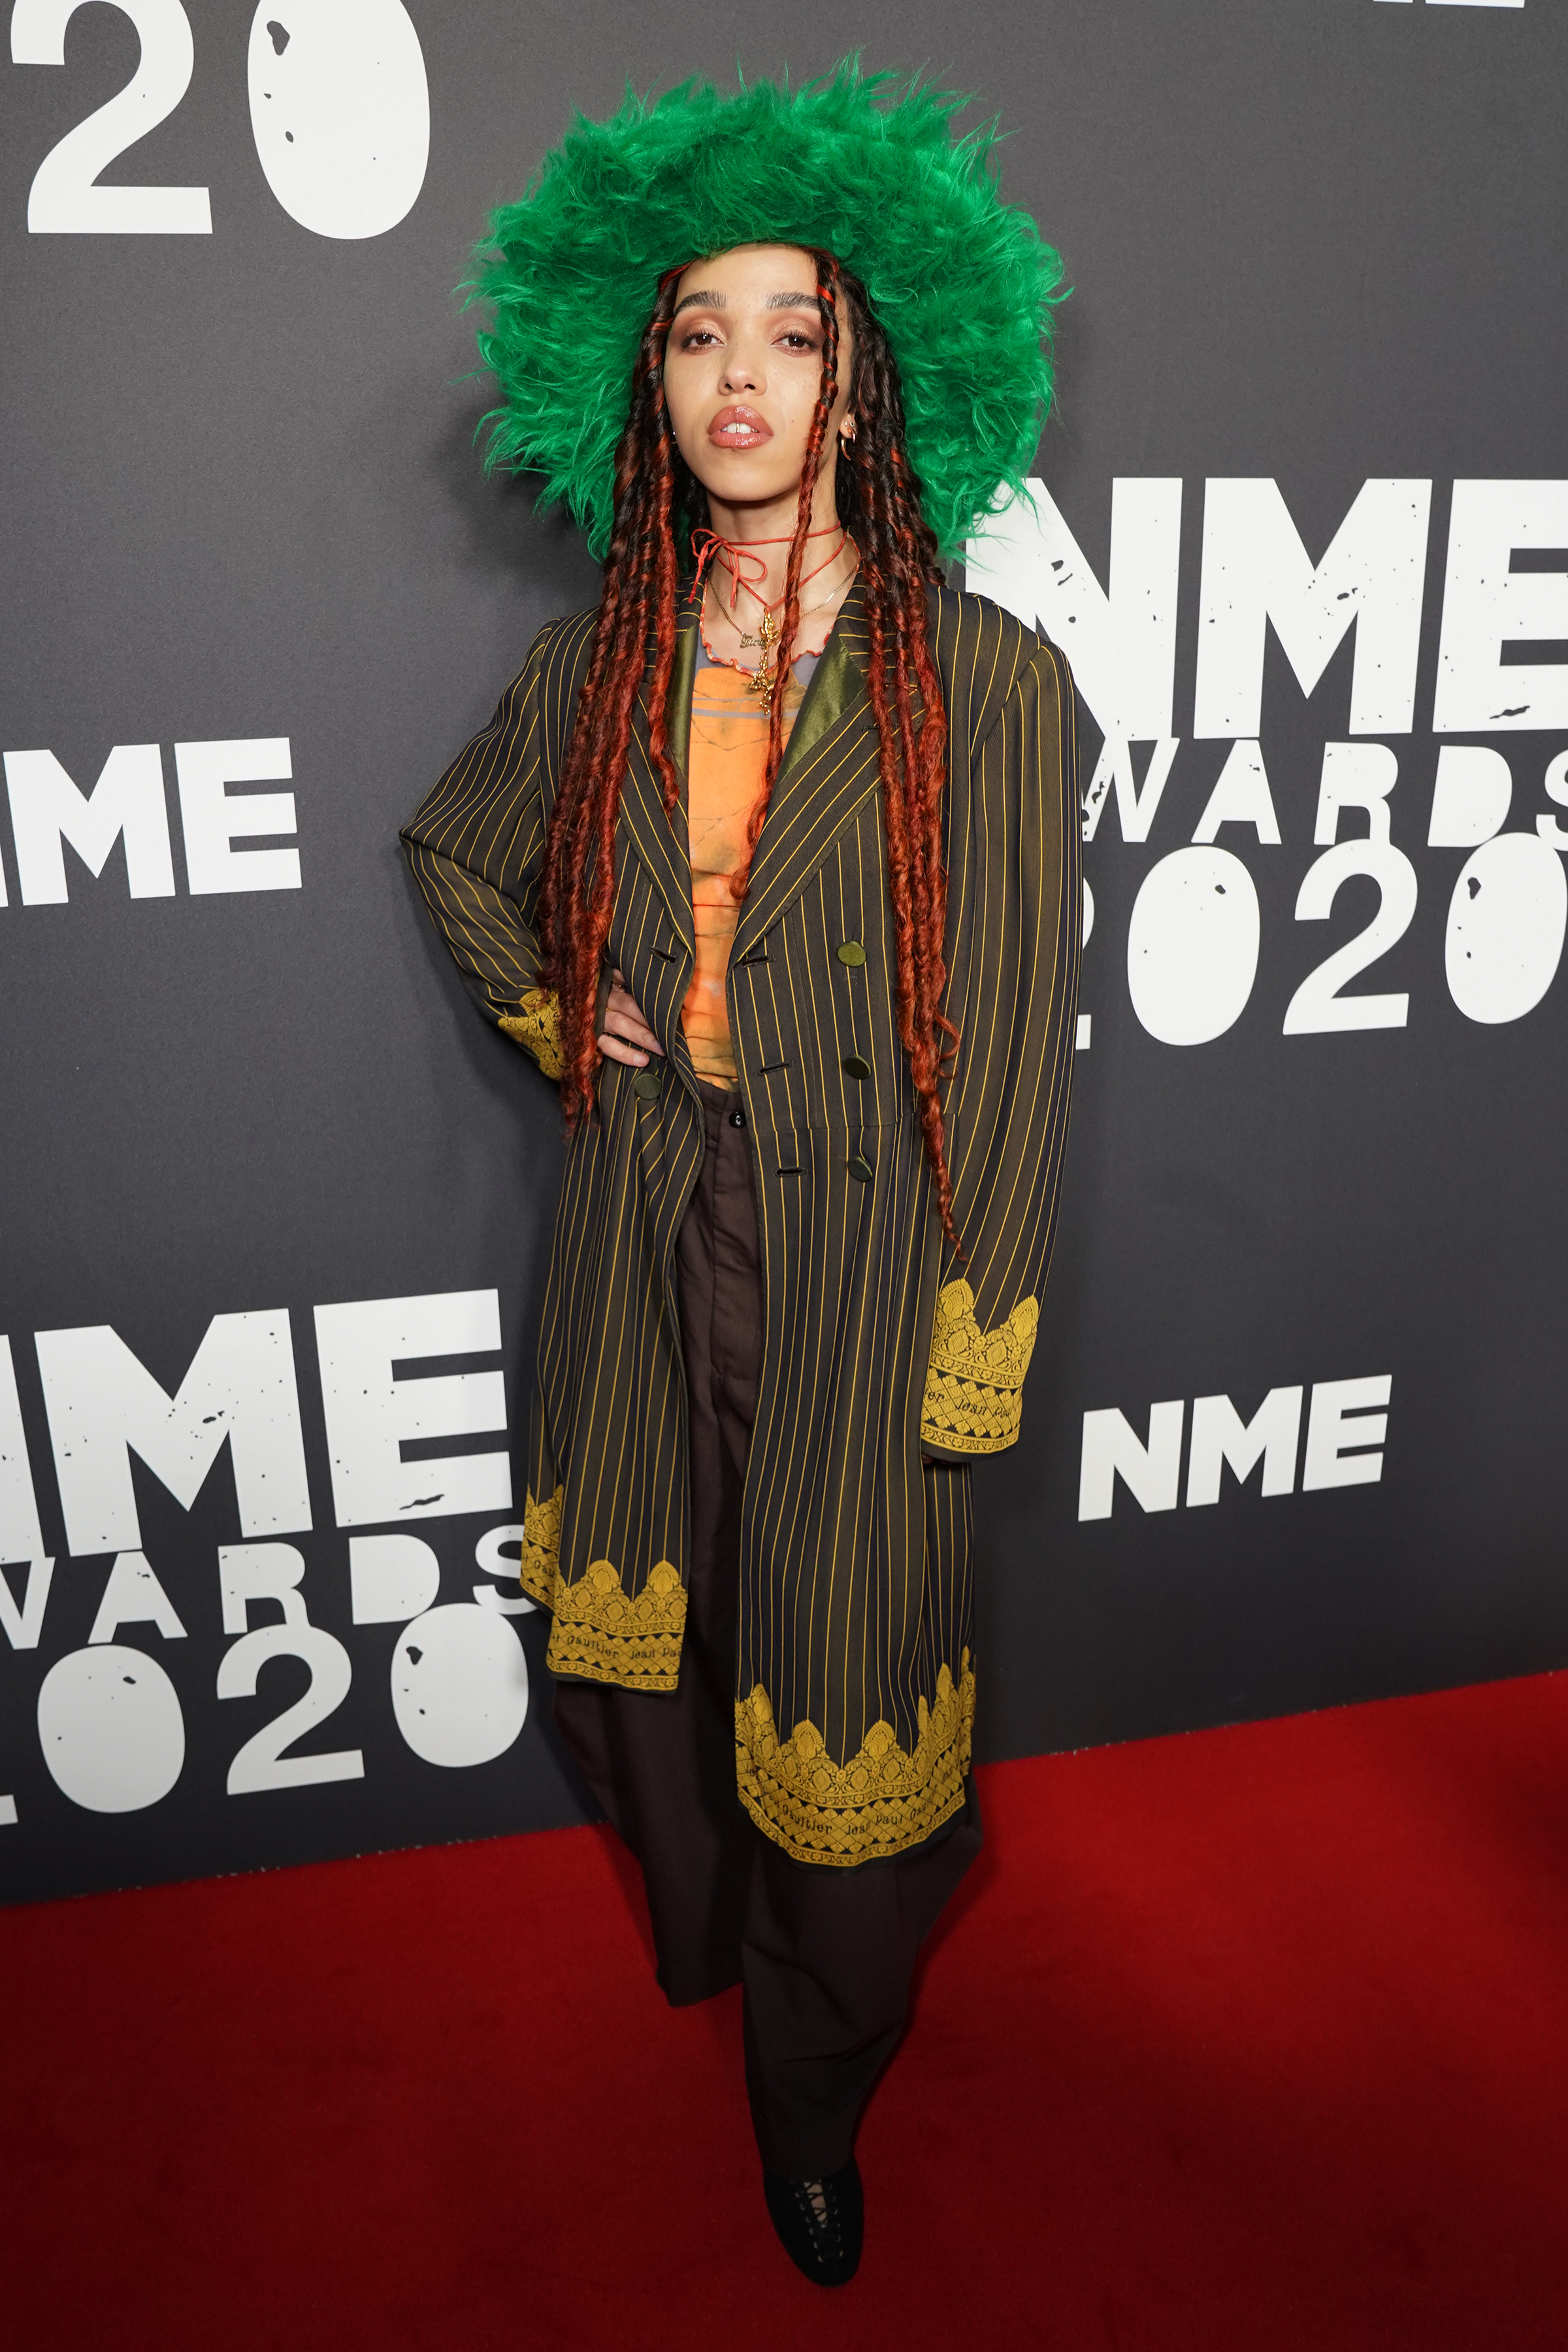 fka twigs wearing vintage gaulthier and a fuzzy green hat at the nme awards 2020